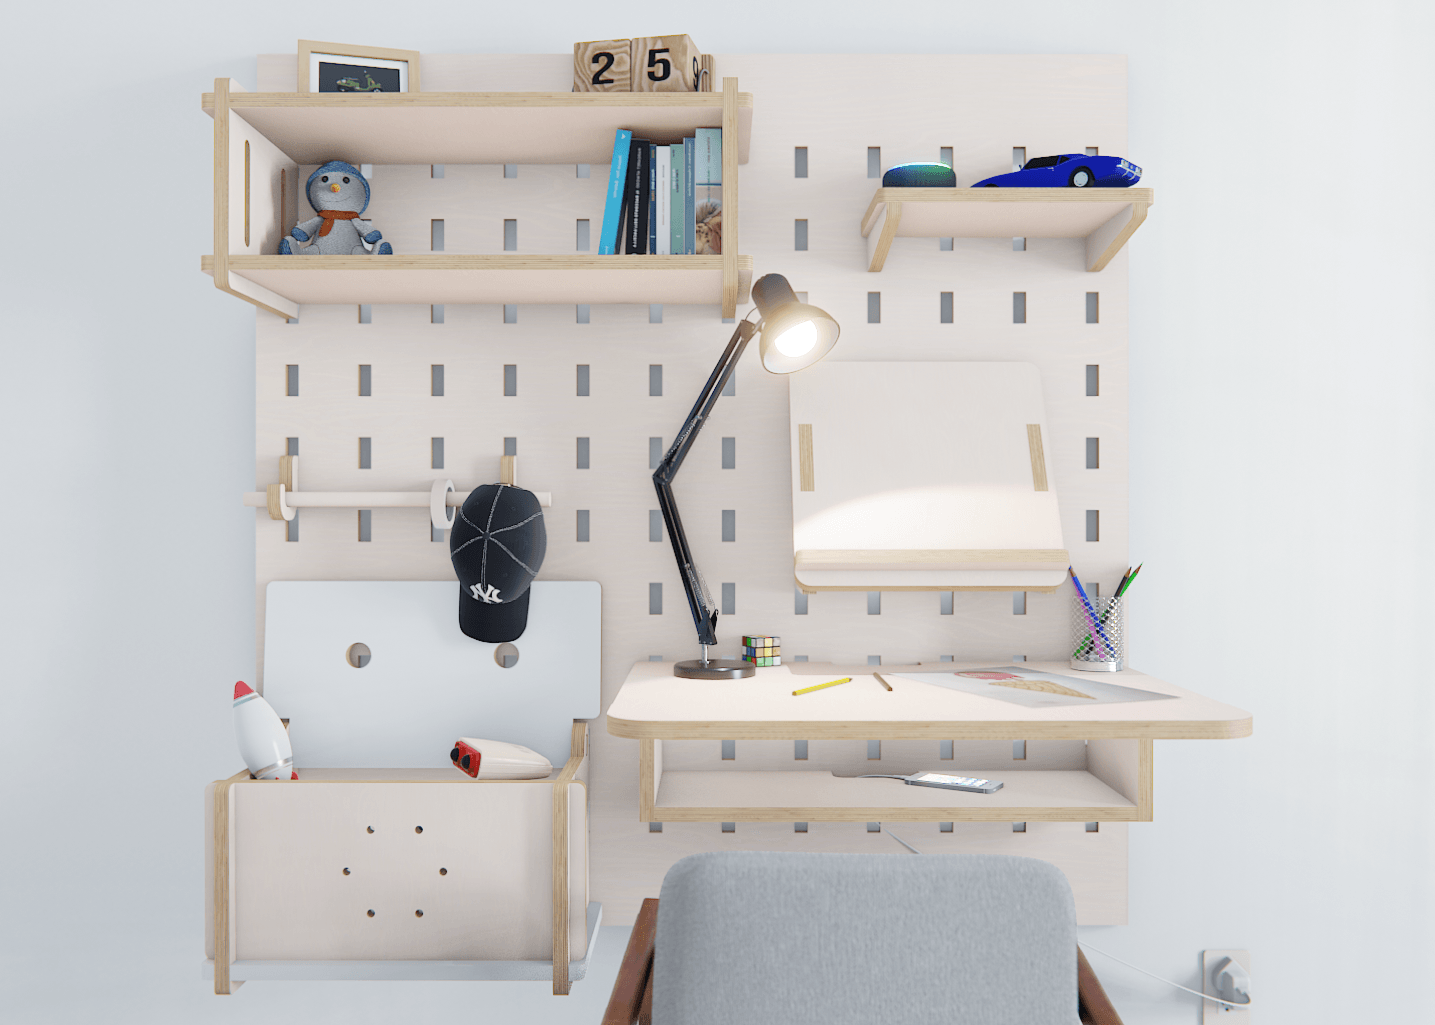 Keep toys in check with our covered plywood storage box. A must-have for any pegboard system.